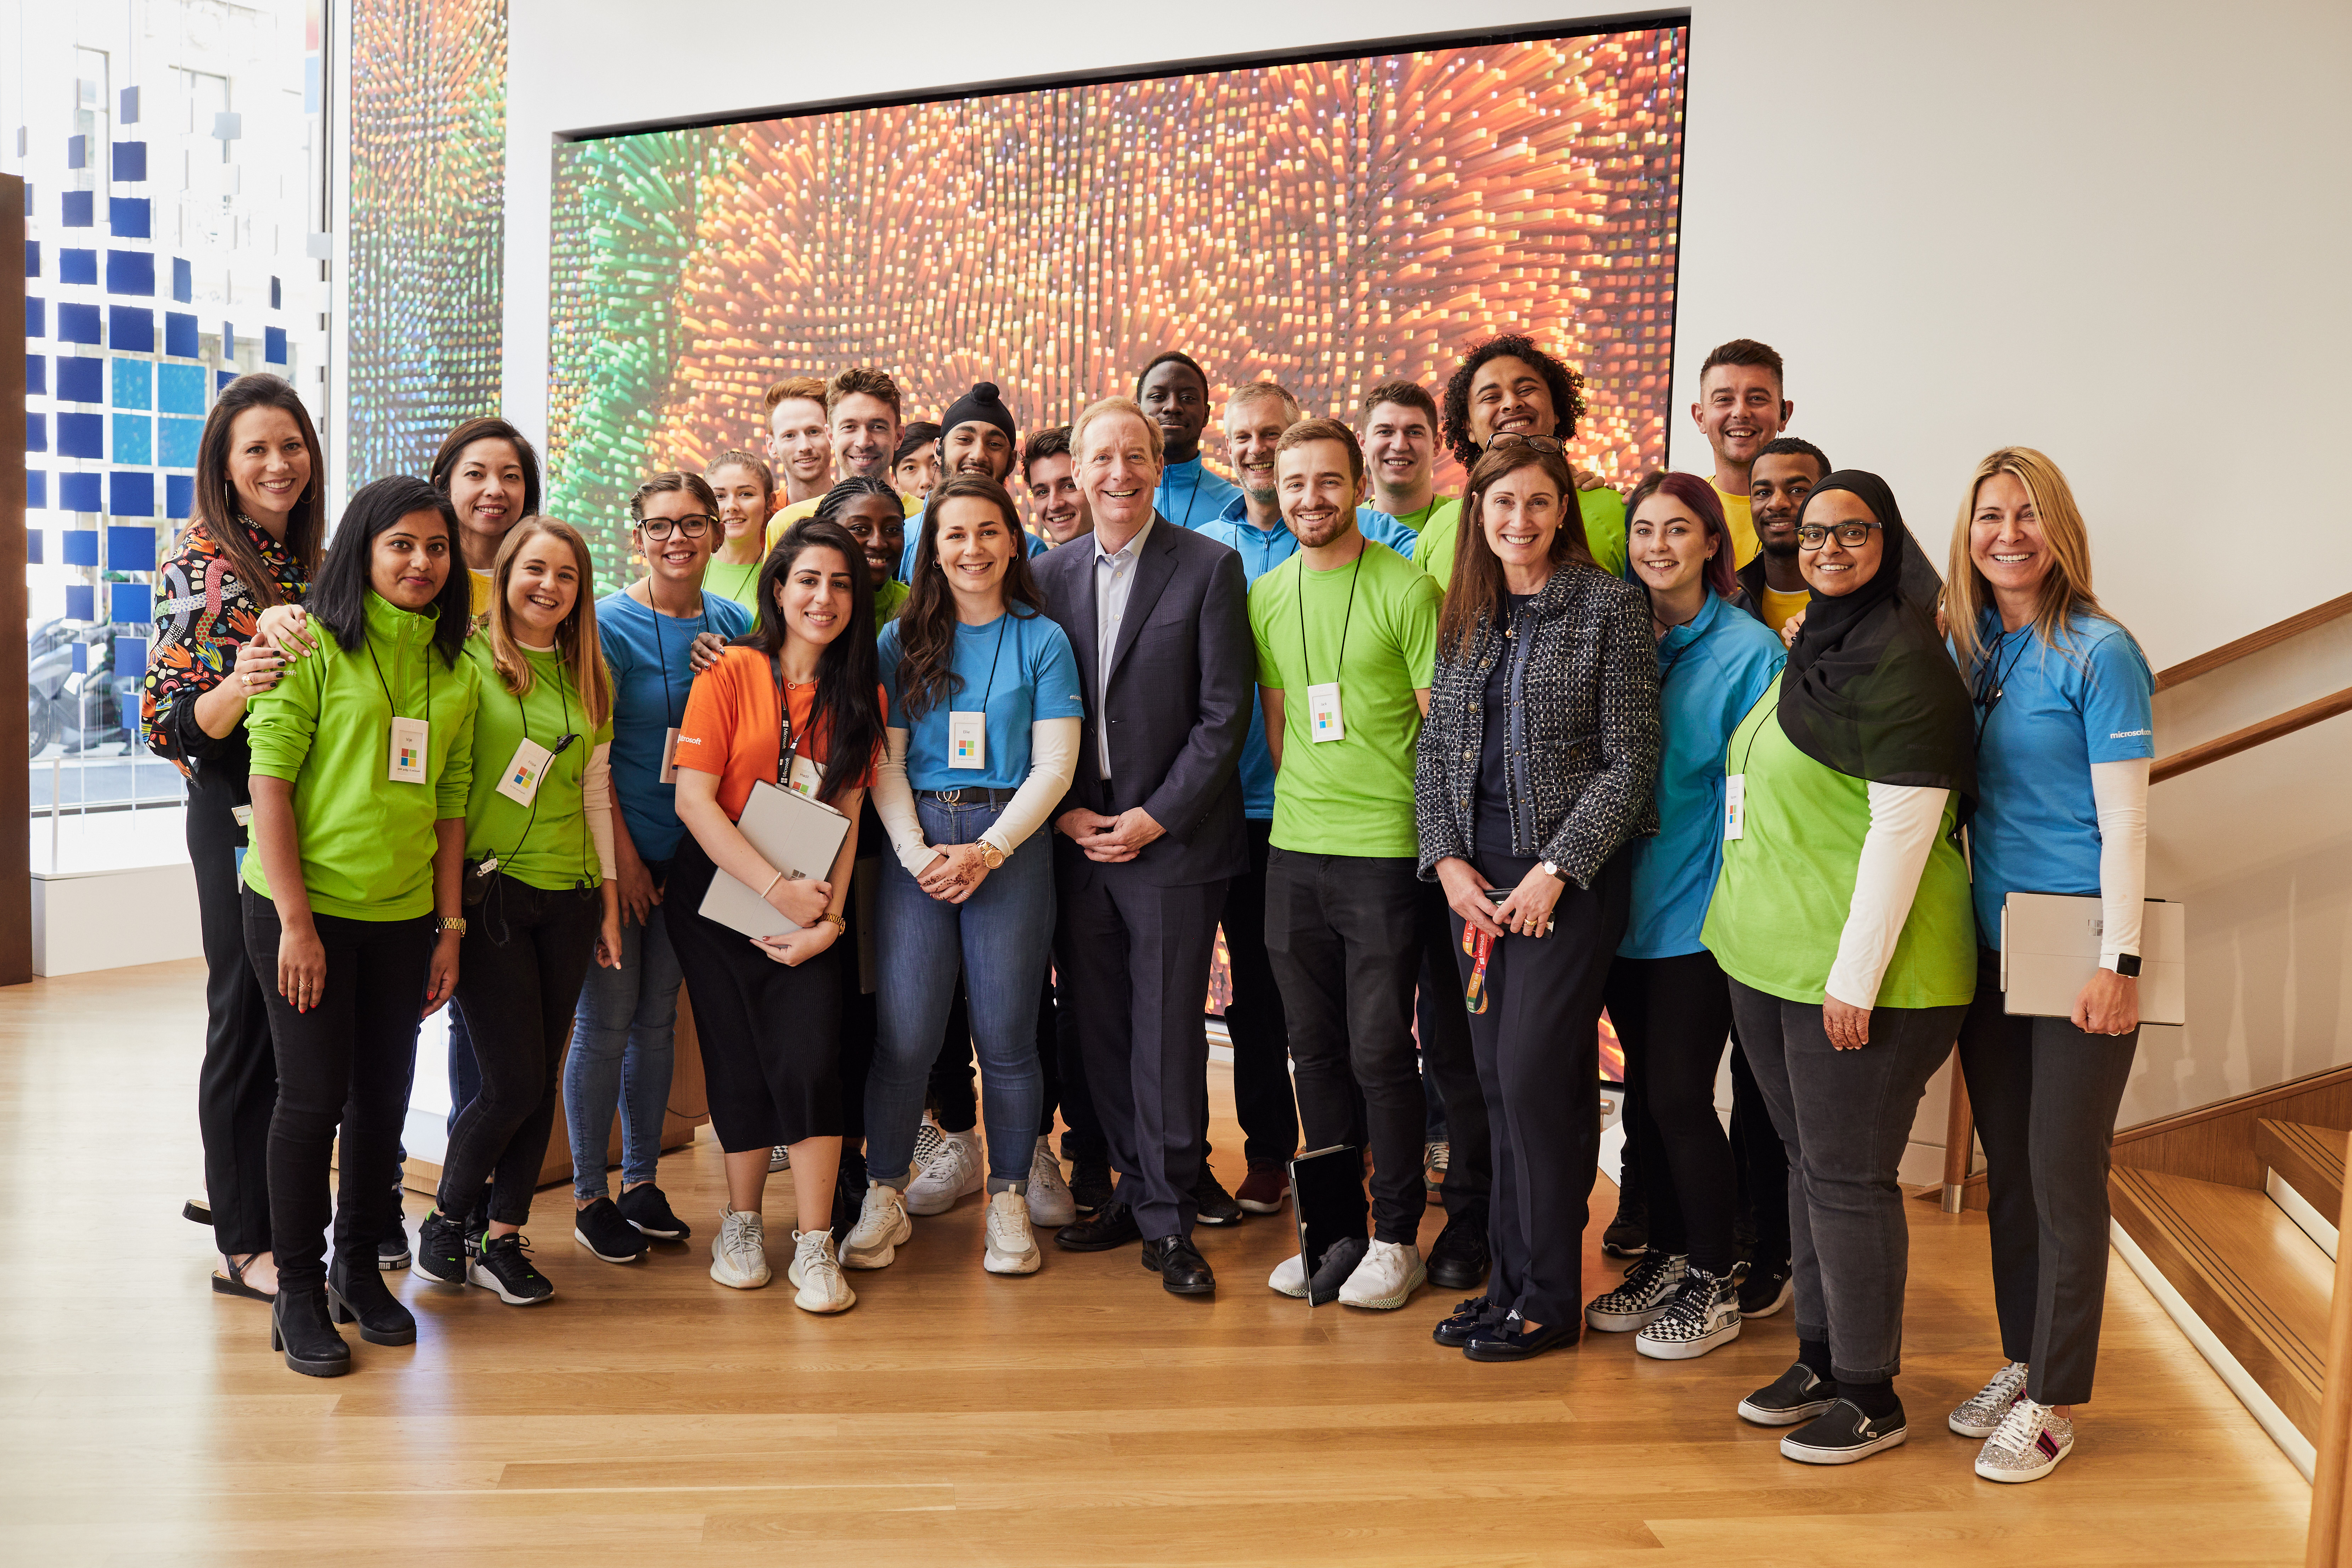 Brad Smith with Cindy Rose, Microsoft UK CEO, and Microsoft Store staff in London